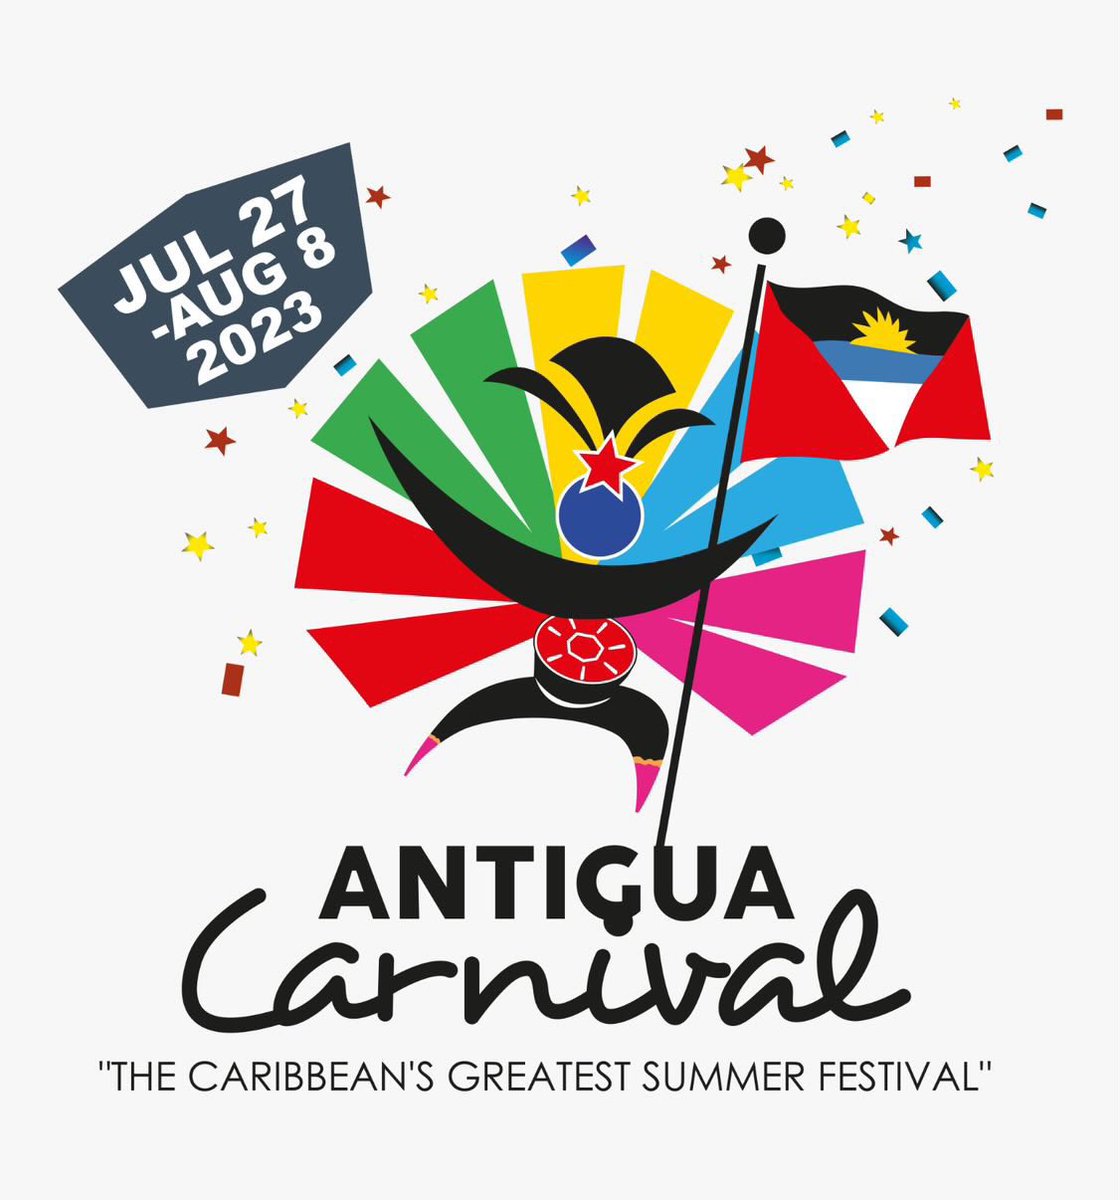 🗣️ANTIGUA CARNIVAL JULY 27TH - AUGUST 8TH 2023

TELL A FRIEND TO TELL A FRIEND
#AntiguaCarnival
#AntiguaCarnival2023
#VisitAntiguaBarbuda 
#LoveAntiguaBarbuda